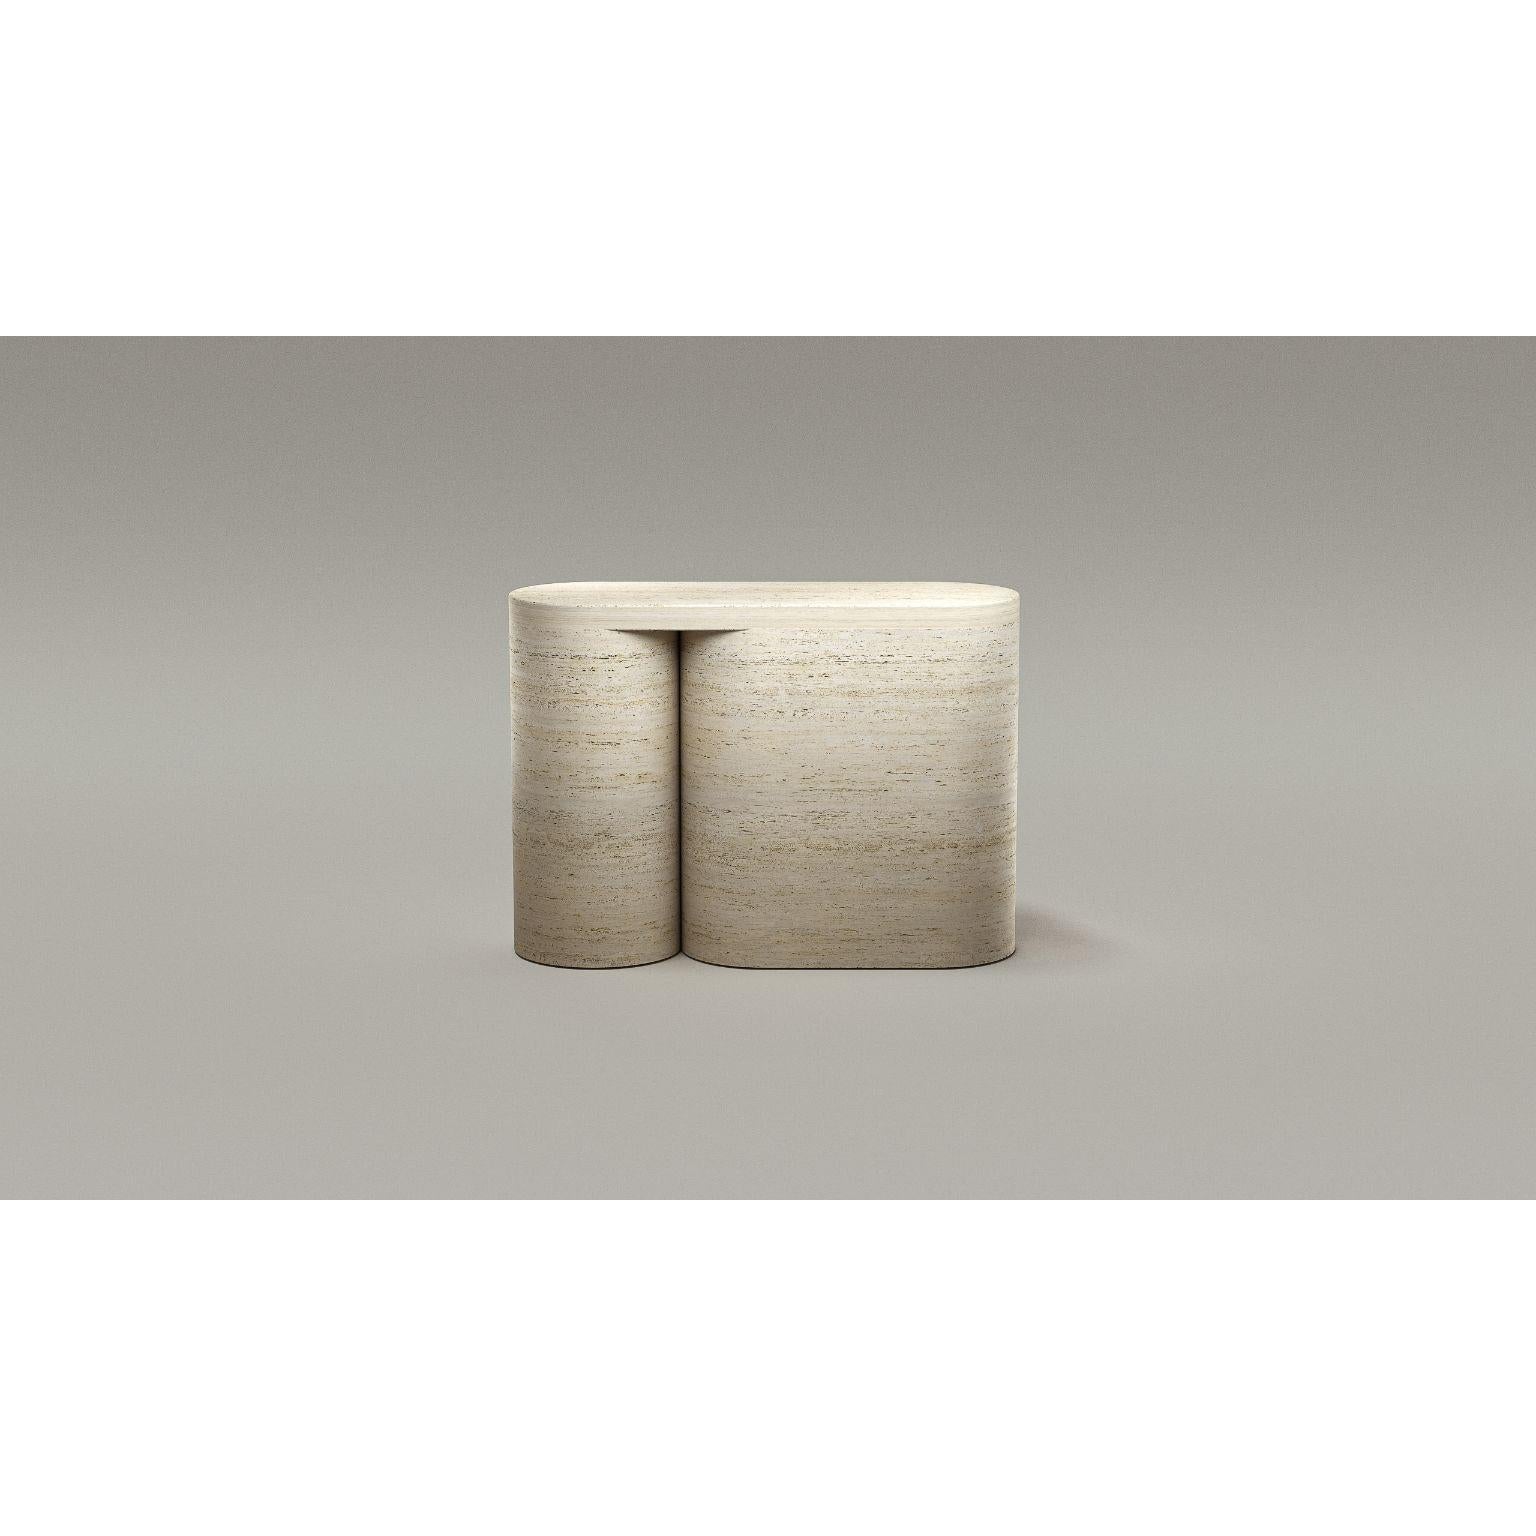 Pleat console by Arthur Vallin
Numbered Edition
Dimensions: W120 x D40 x H85 cm
Materials: Travertine Stone
Finishing: Un-honed

French Artist, Designer, and Creative Director Arthur Vallin hold a master’s degree in Art Direction from the